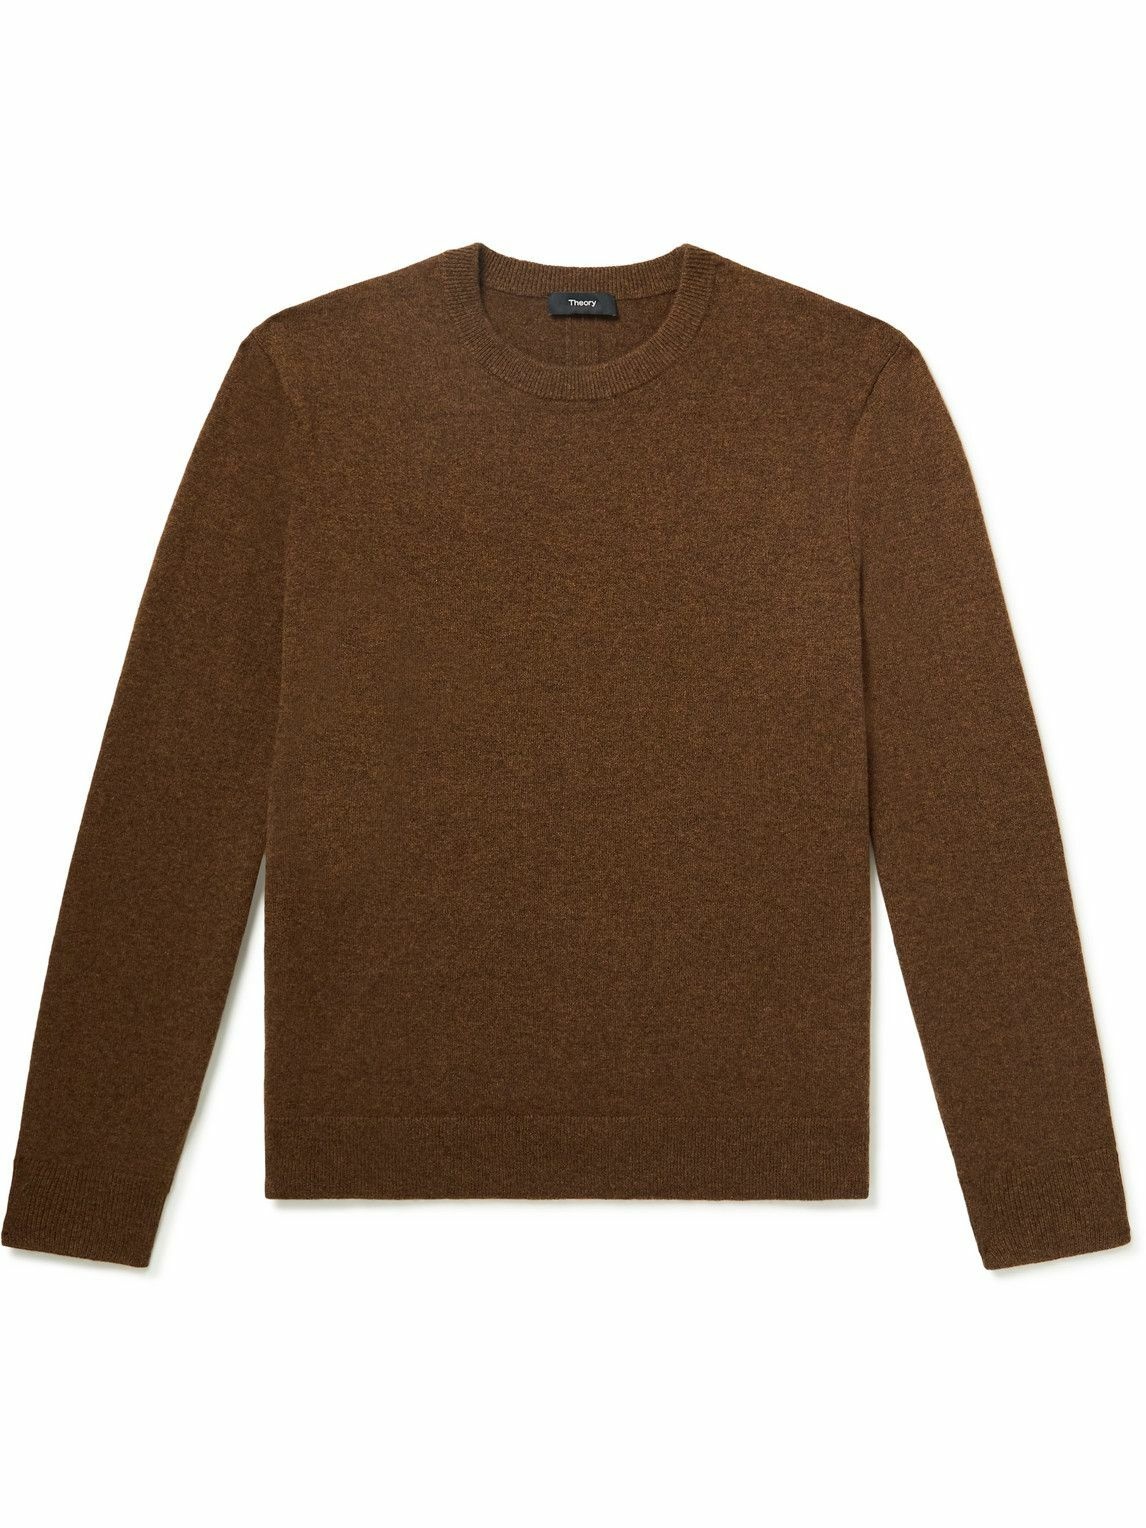 Theory - Hilles Cashmere Sweater - Brown Theory